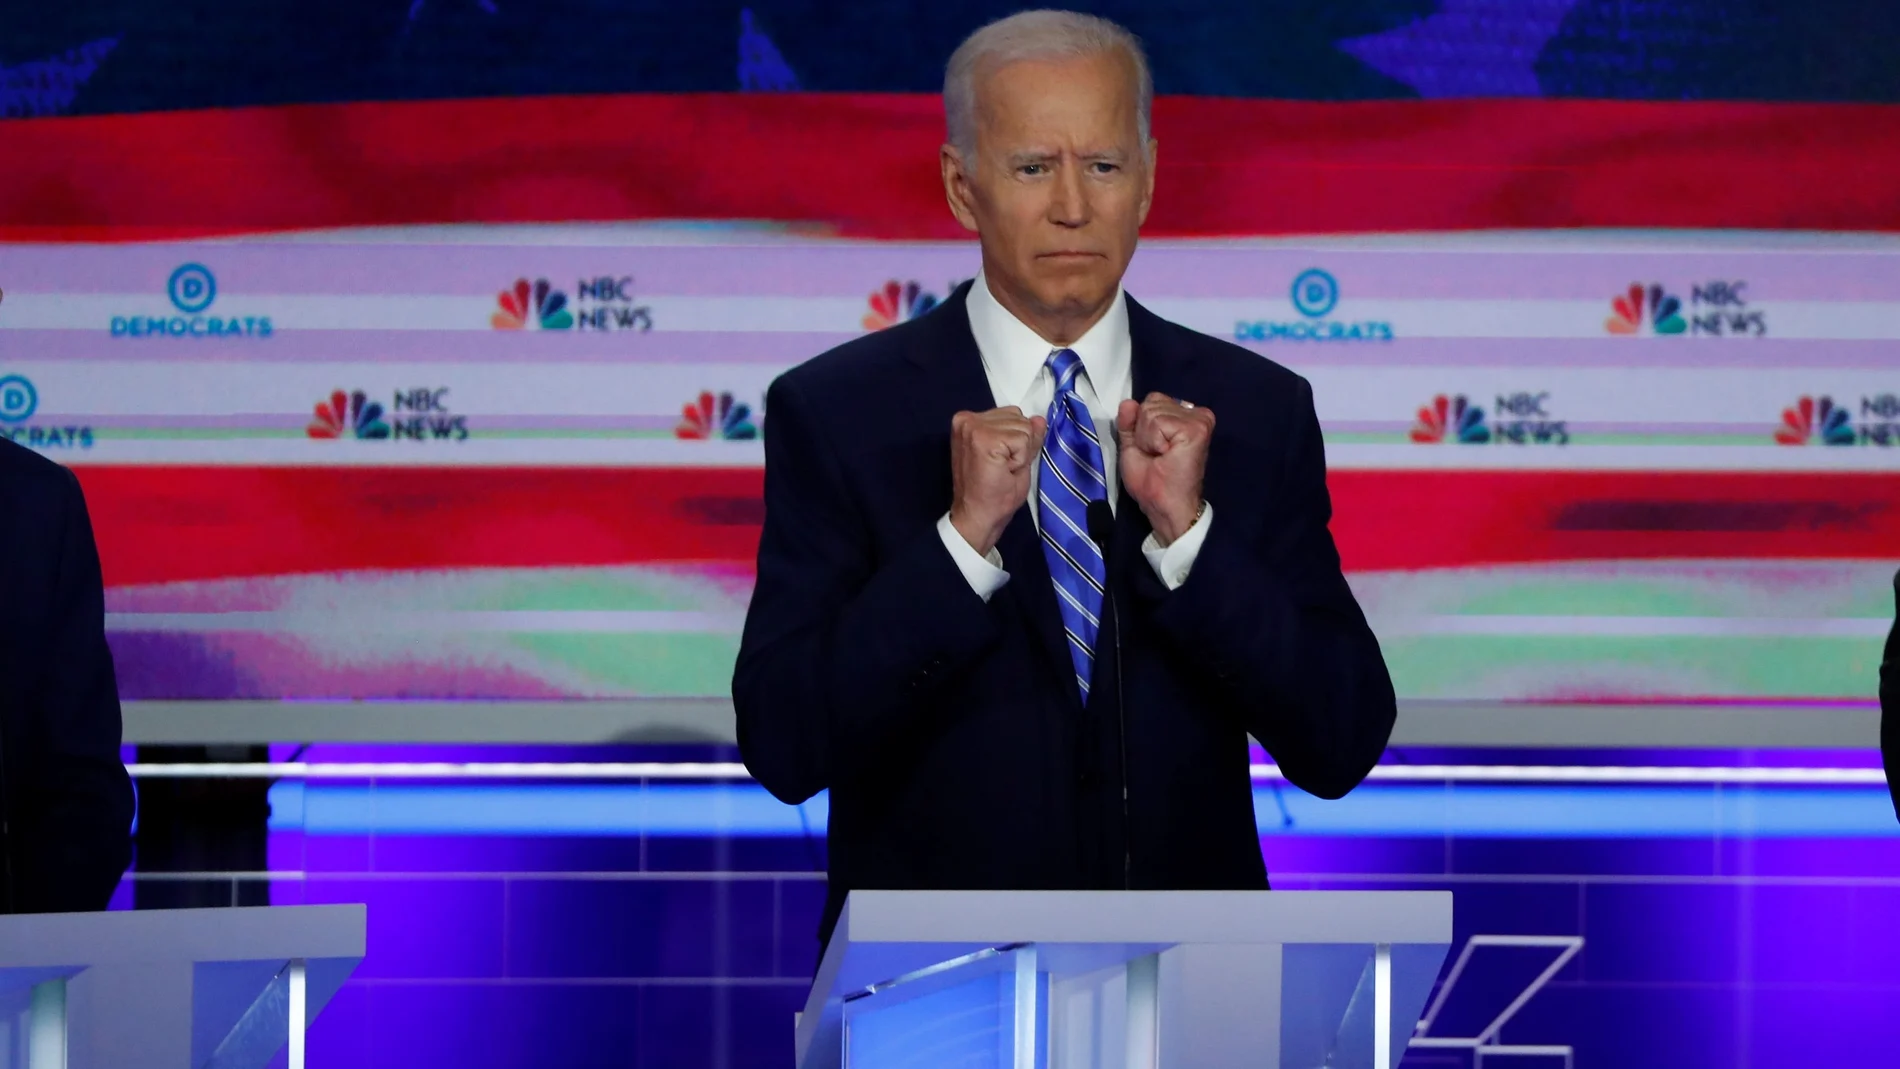 FILE PHOTO: Former Vice President Joe Biden speaks during the second night of the first U.S. 2020 presidential election Democratic candidates debate in Miami, Florida, U.S.